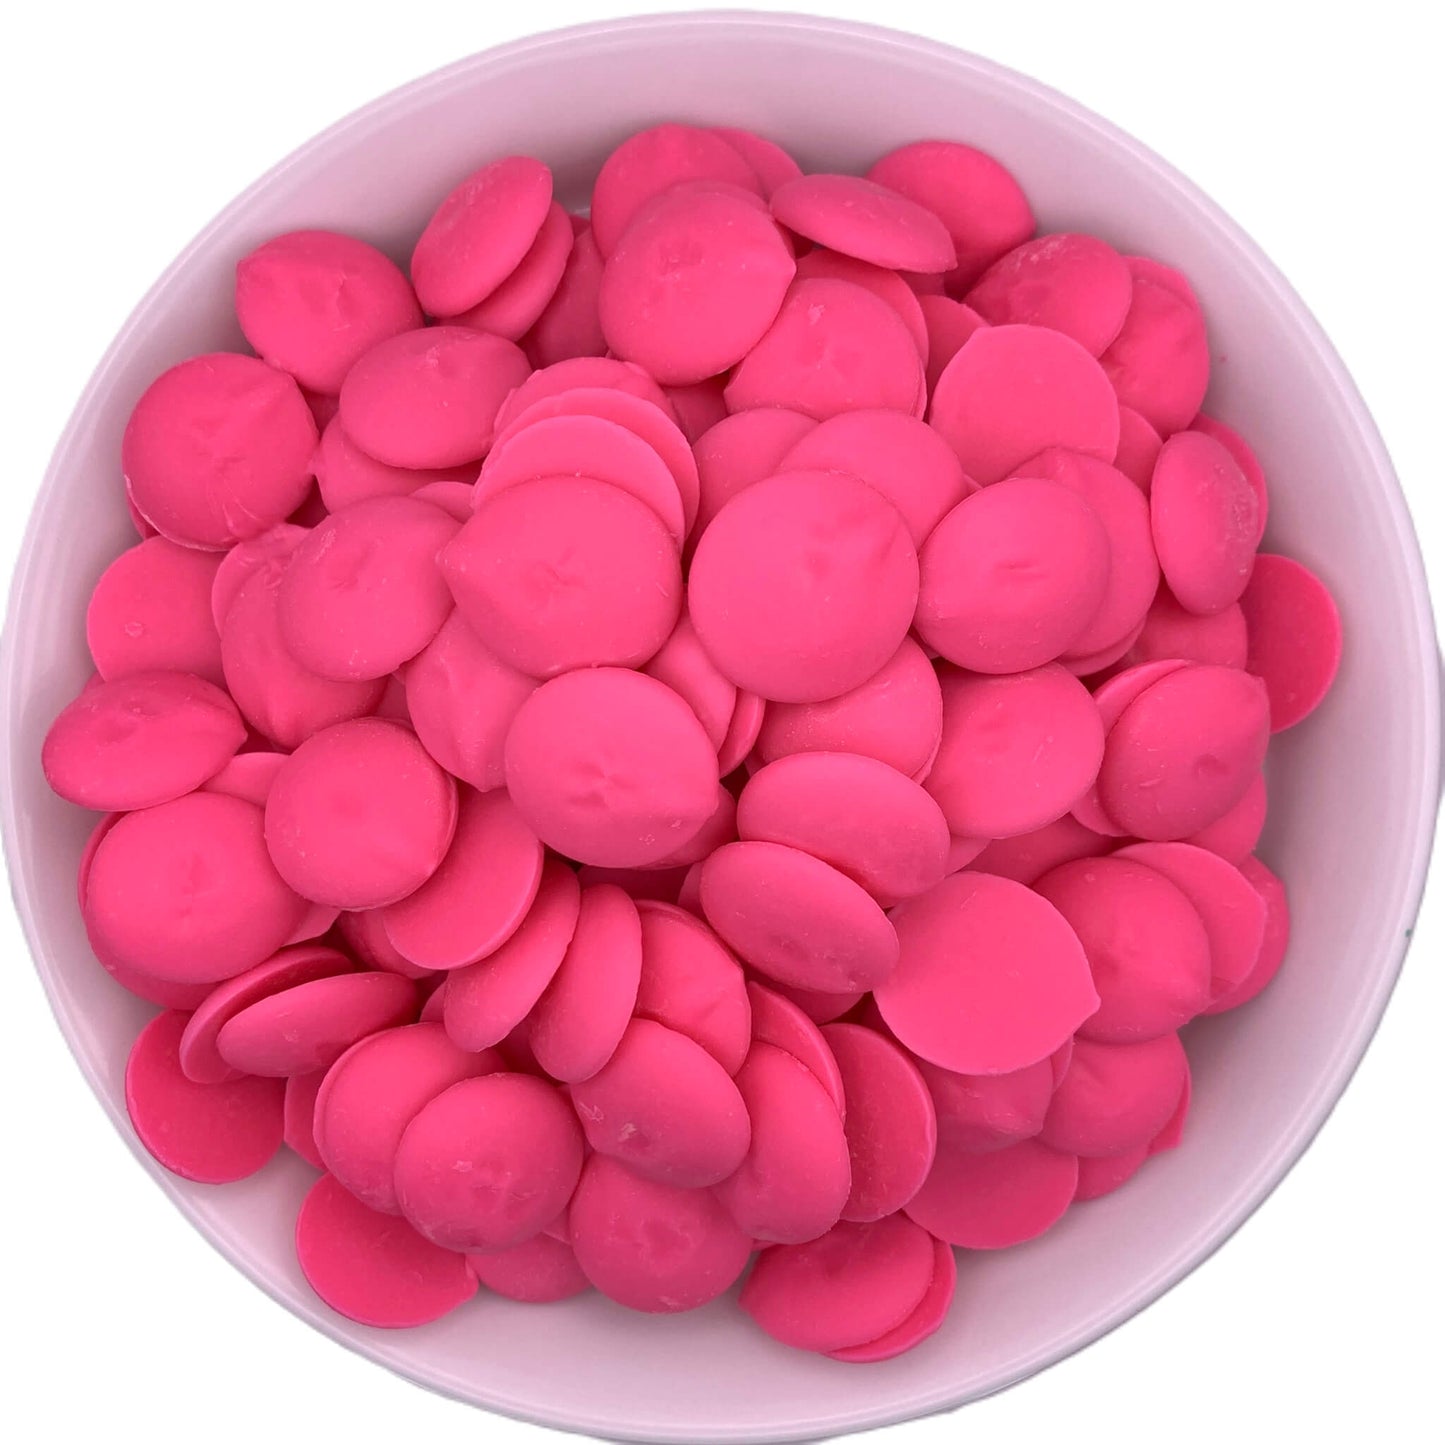 Overhead view of a white bowl filled with hot pink chocolate melting wafers, showing a vibrant and uniform pink color ideal for themed party treats or special occasion confections.